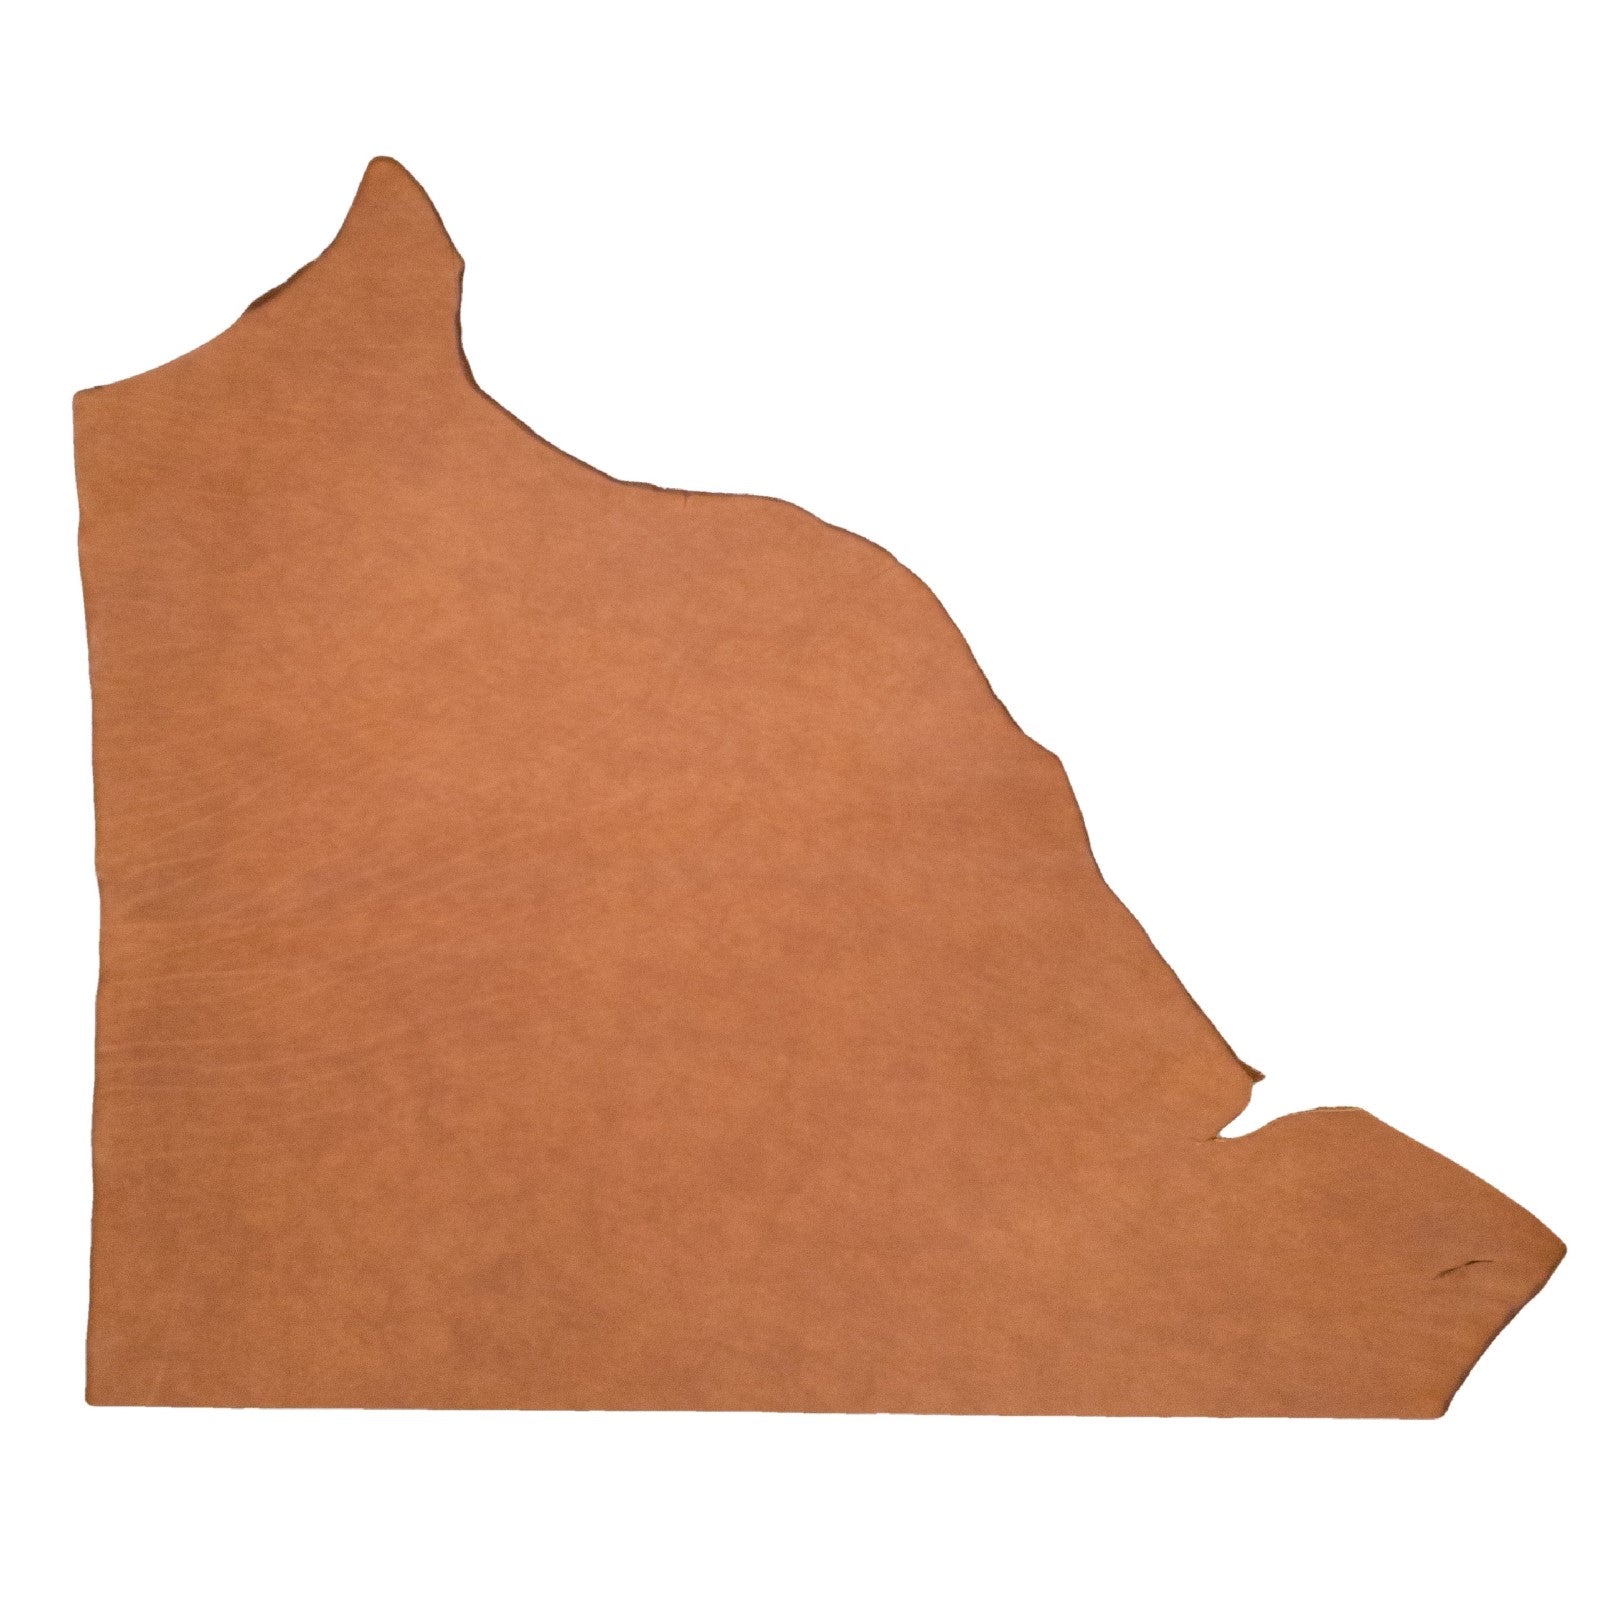 Taos (Oro), SB Foot, Non-stock, 5-6oz, Oil Tanned Hides, Top Piece / 6.5 - 7.5 Sq Ft | The Leather Guy